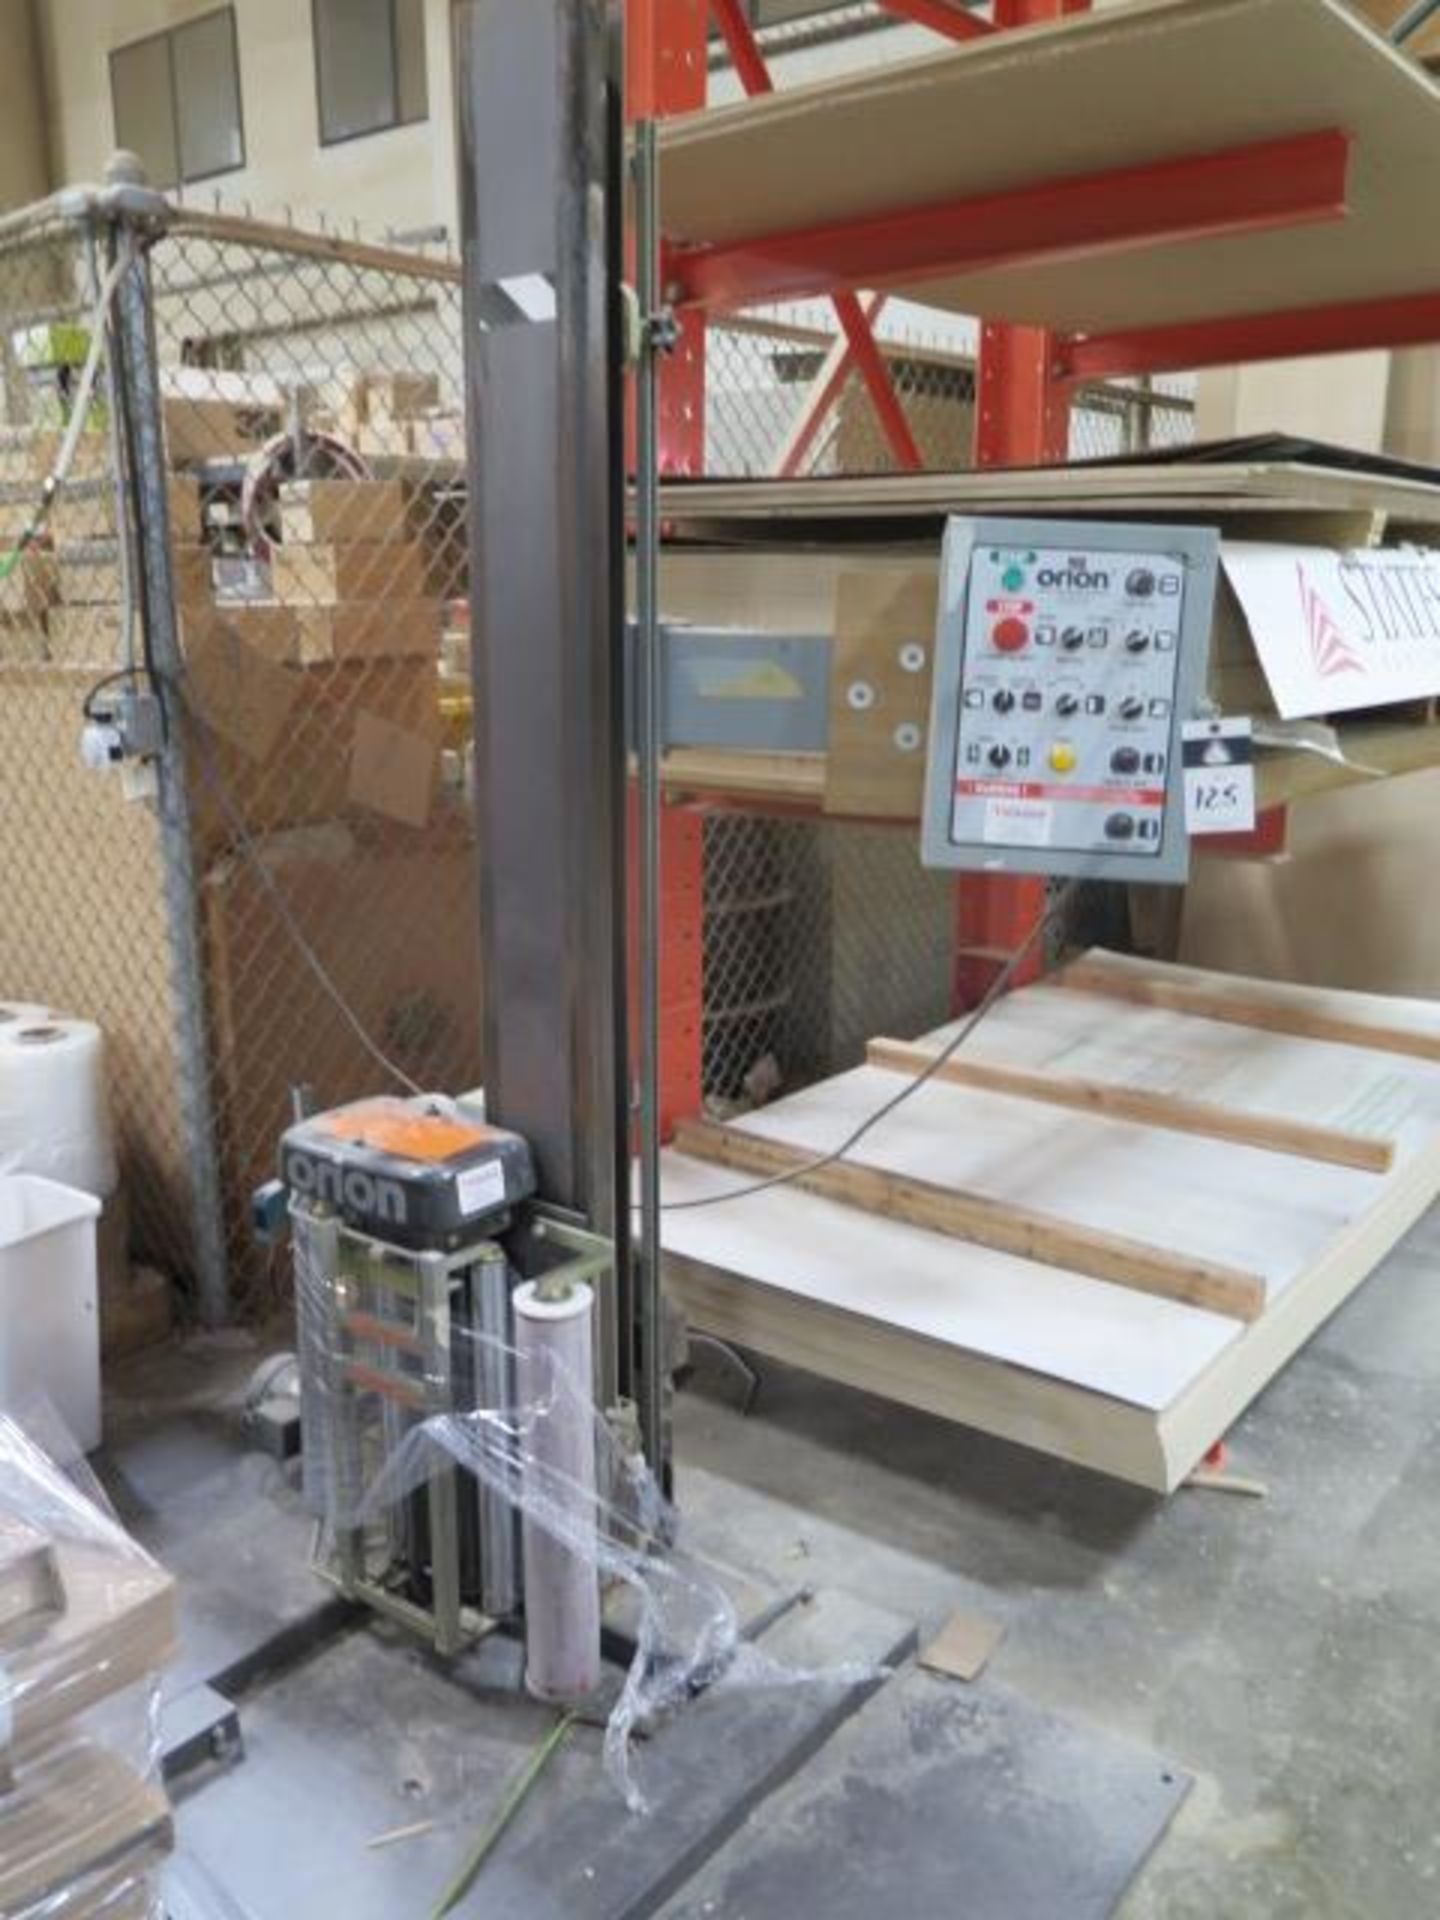 2006 Orion L55/17S Semi-Automatic Pallet Wrapper s/n 2006-0916942 (SOLD AS-IS - NO WARRANTY) - Image 2 of 9